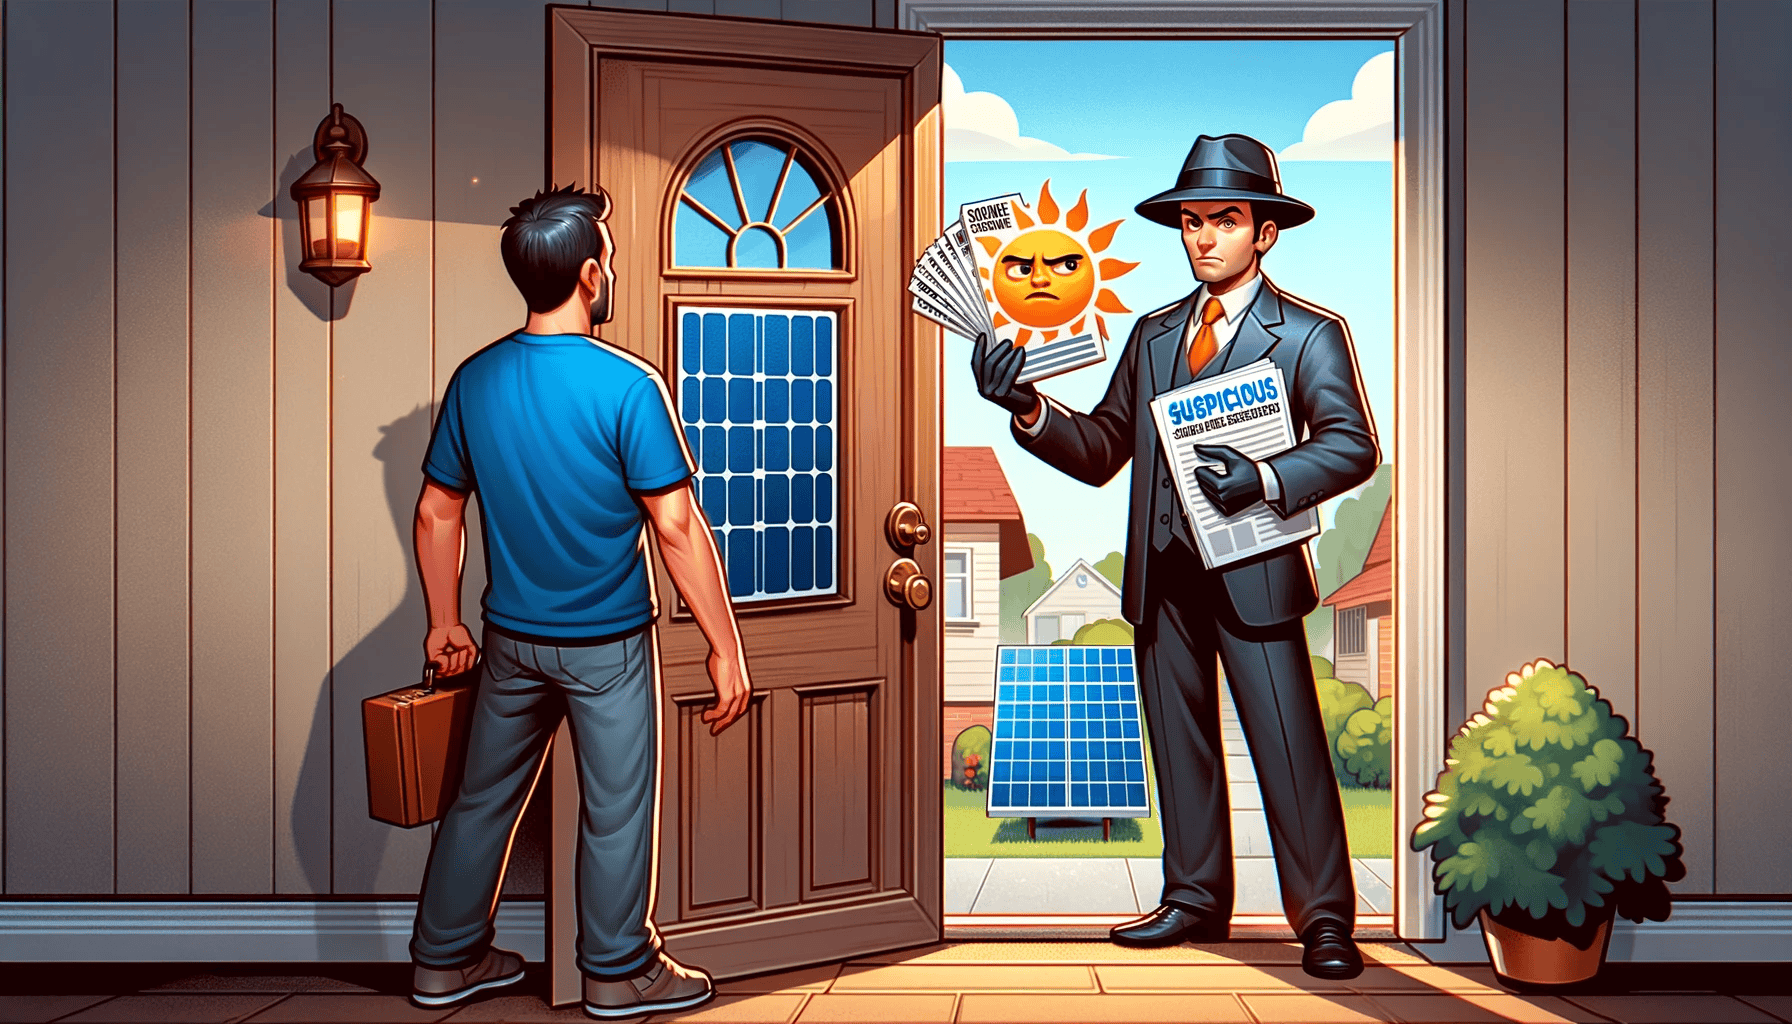 A person standing at their front door is talking to a suspicious-looking salesman holding solar-related materials, with solar panels visible in the background.